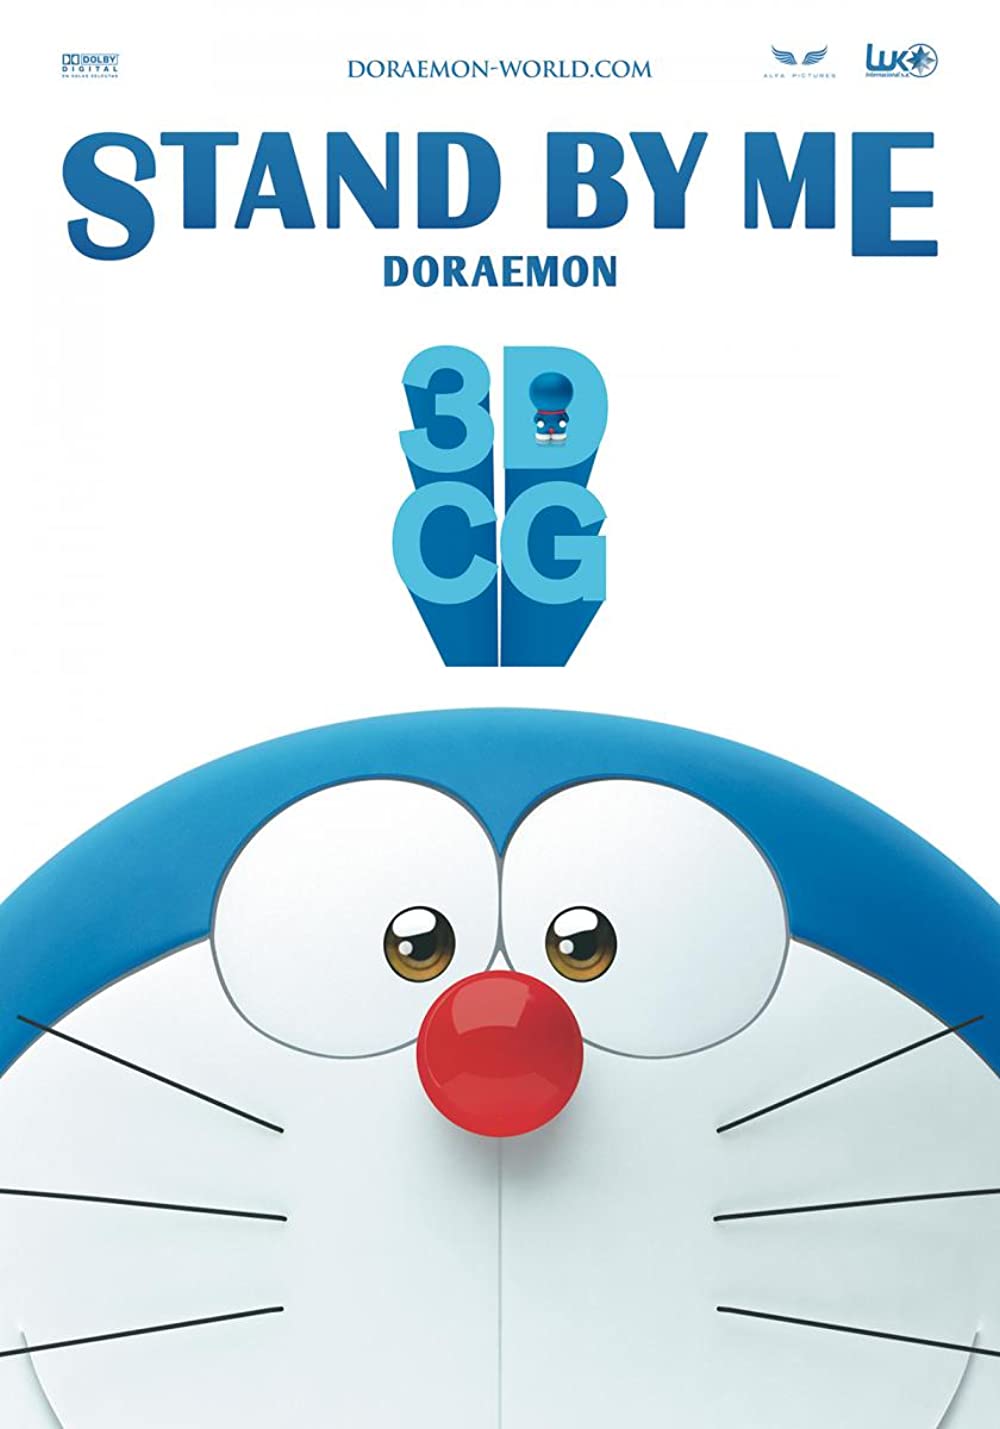 Detail Foto Doraemon Stand By Me Nomer 4